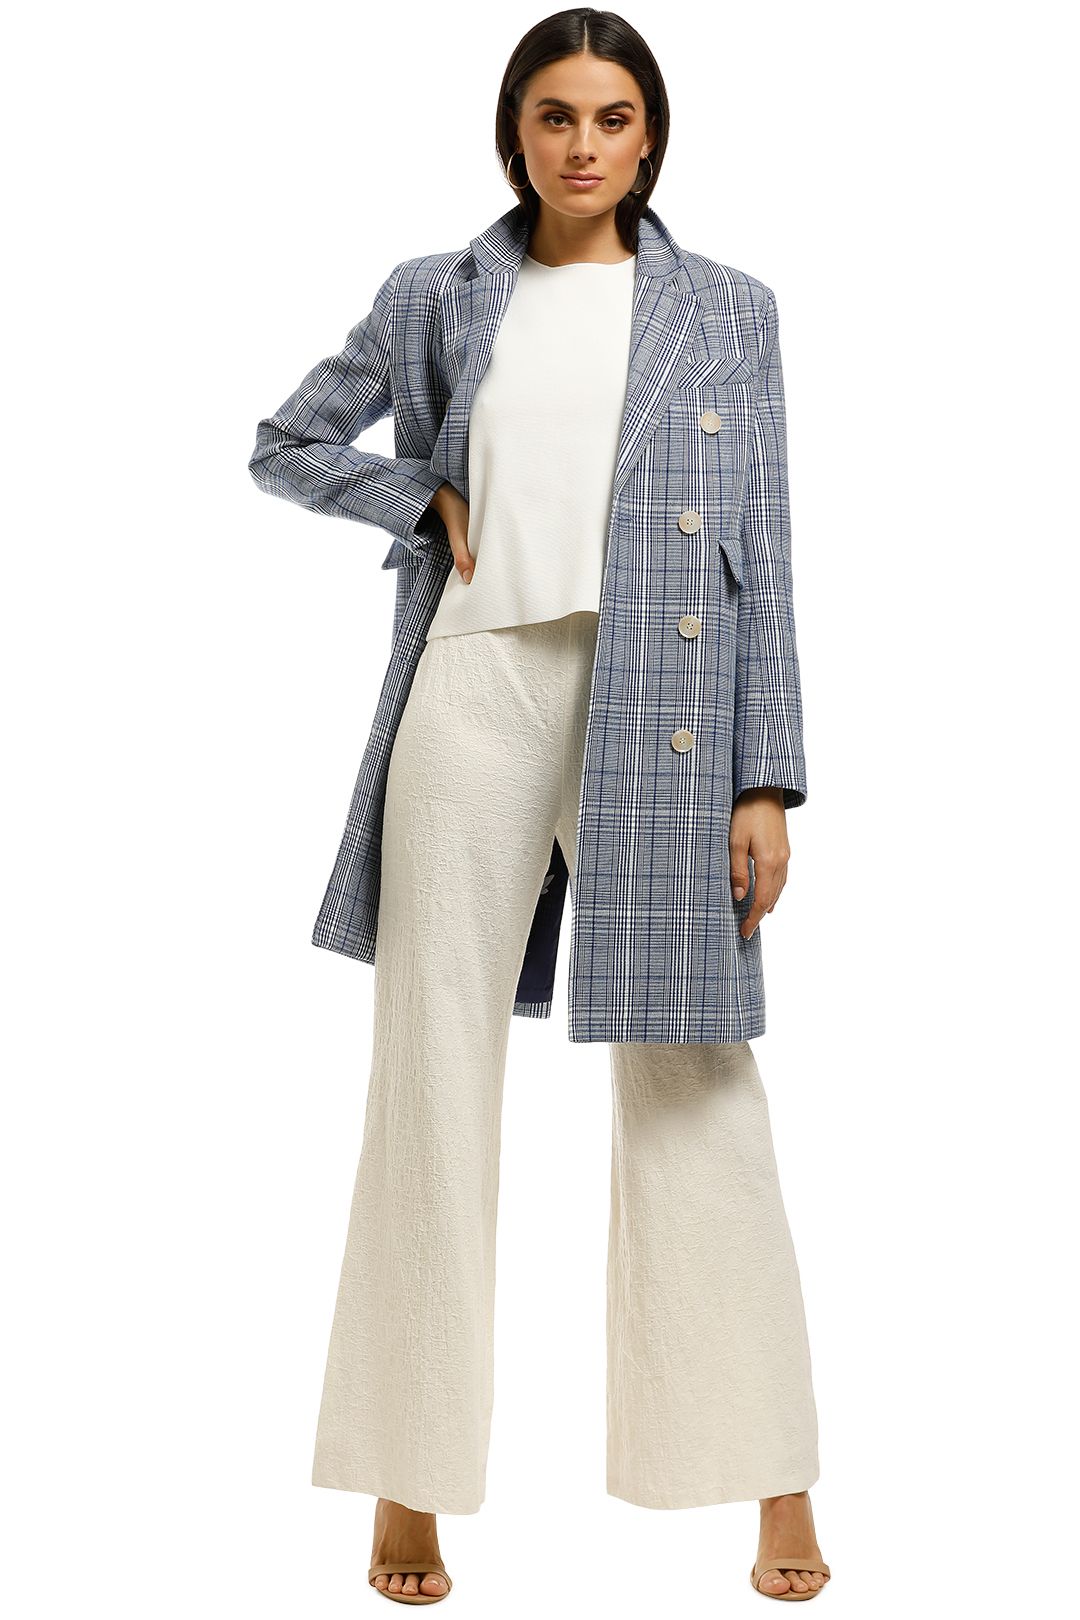 Cooper-By-Trelise-Cooper-Power-Suit-Coat-Blue-Check-Front